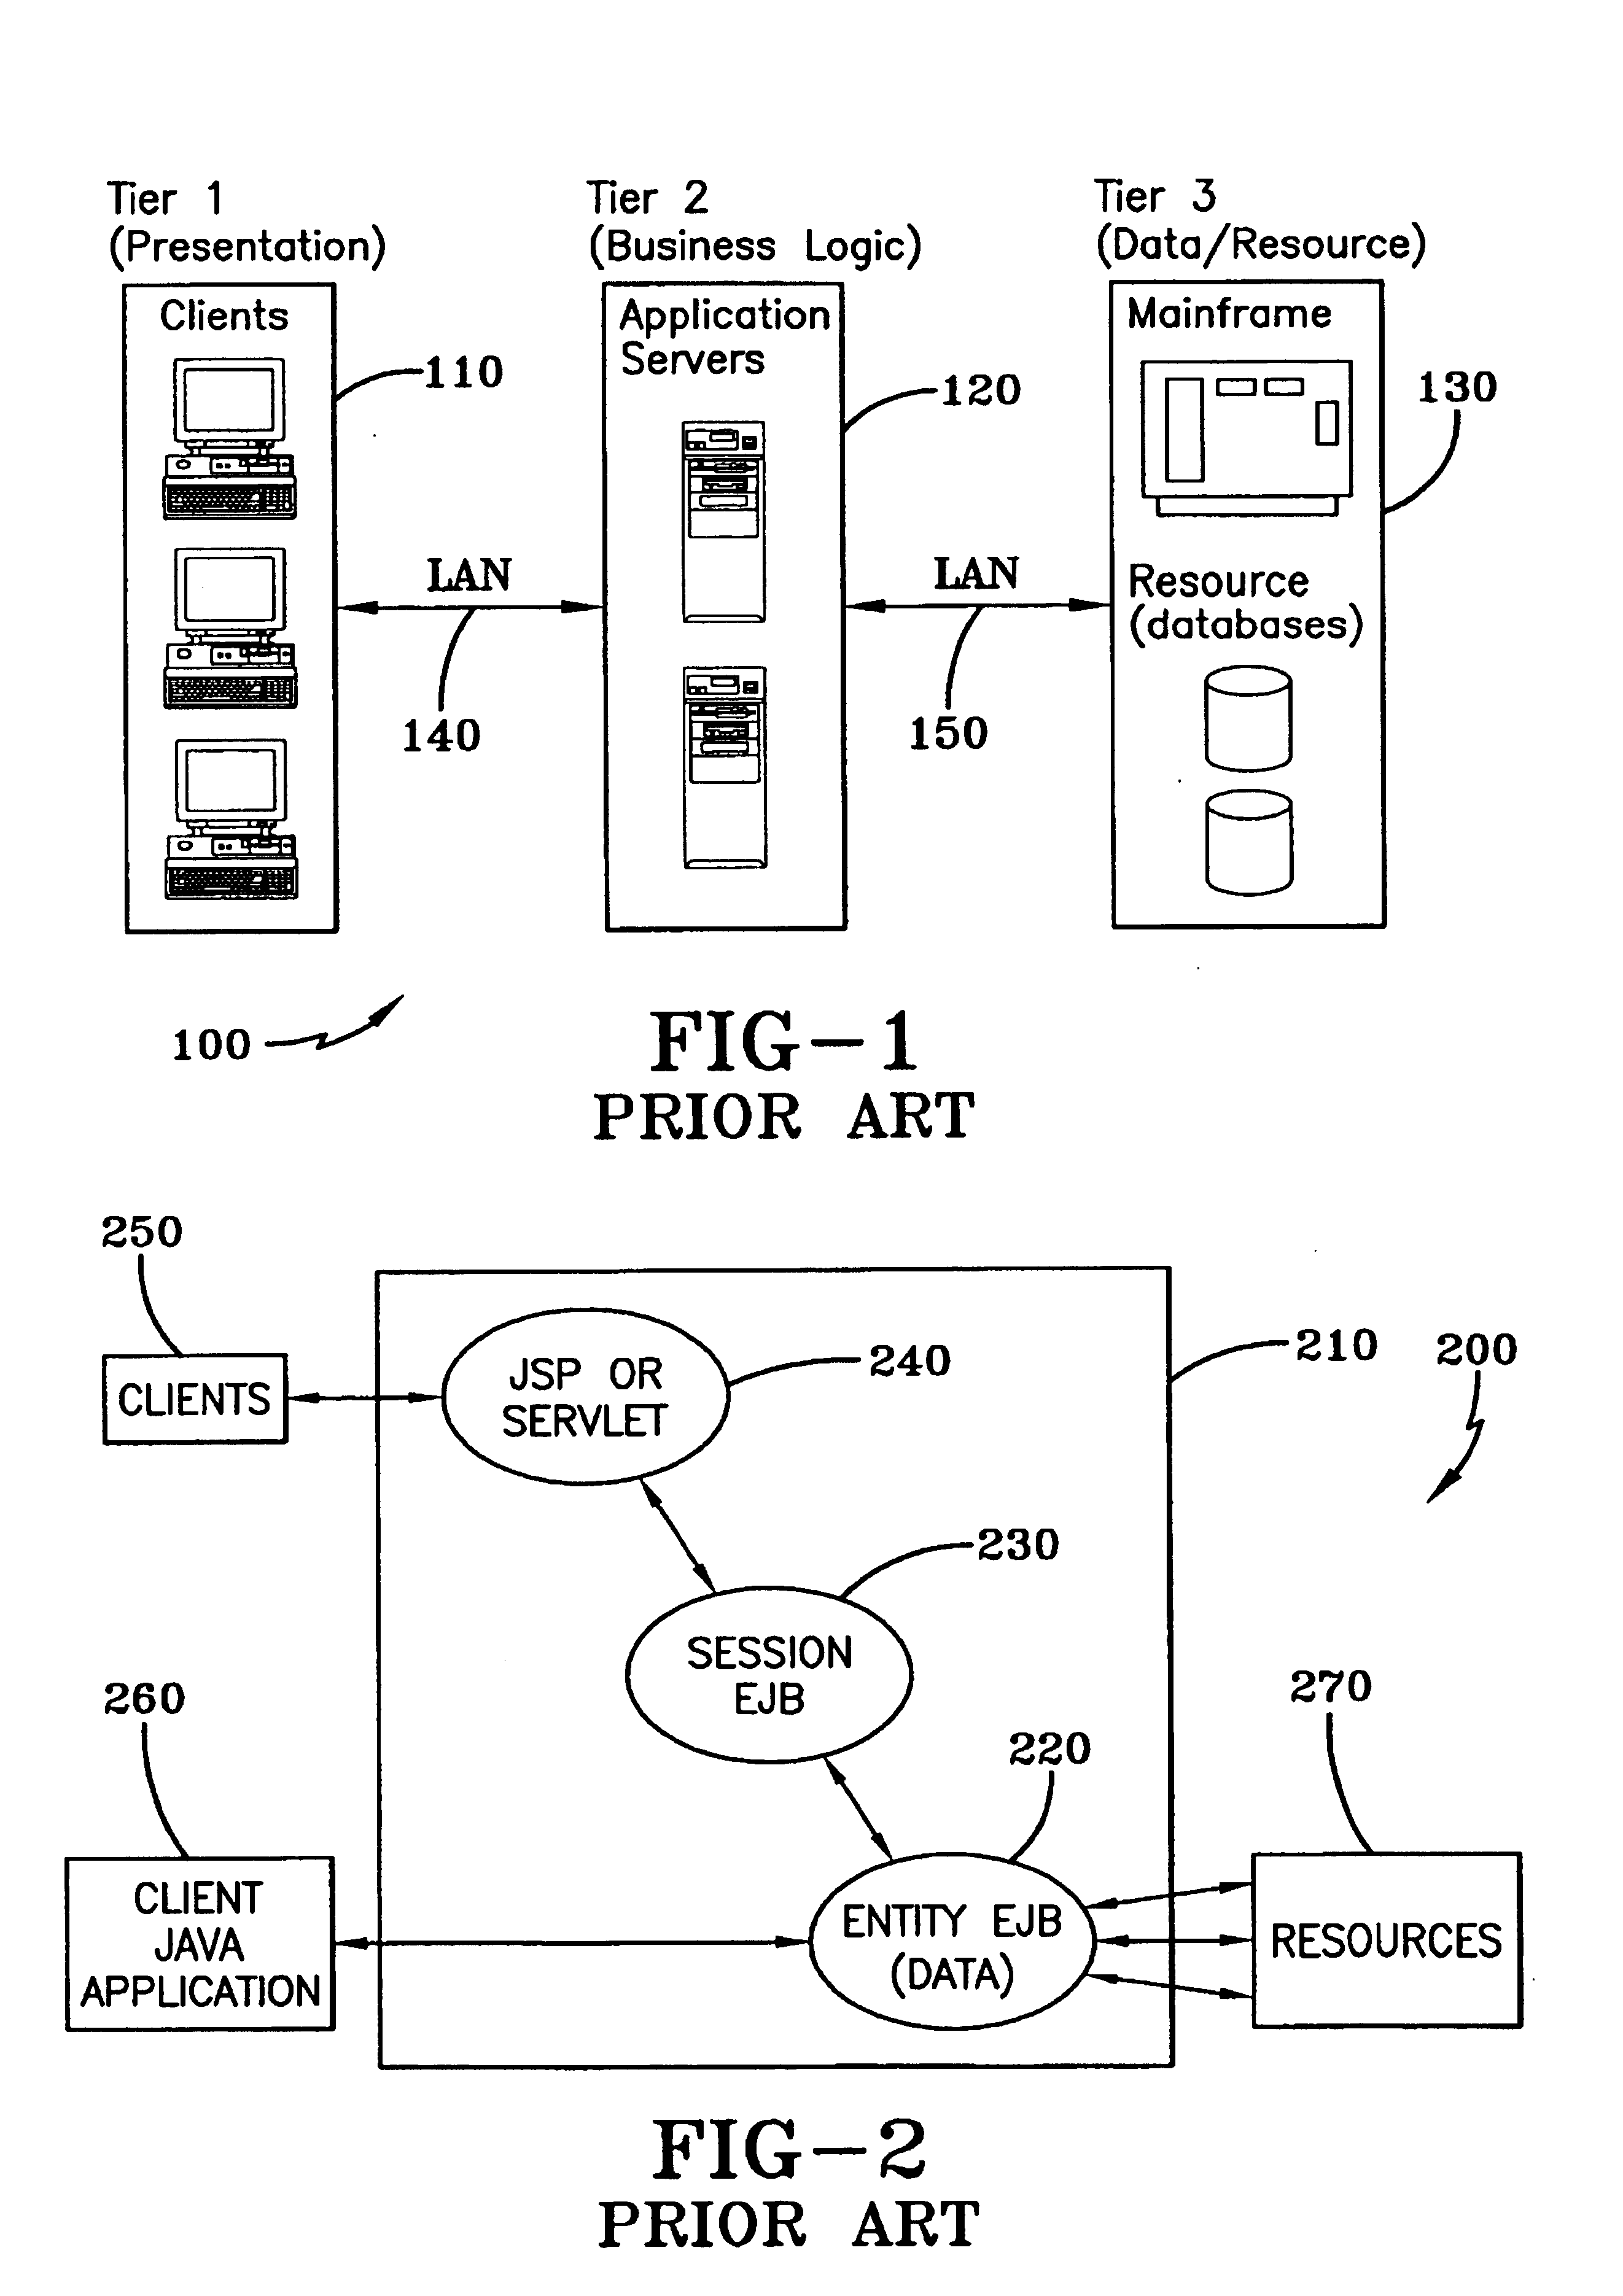 System and method for dynamically securing dynamic-multi-sourced persisted EJBS